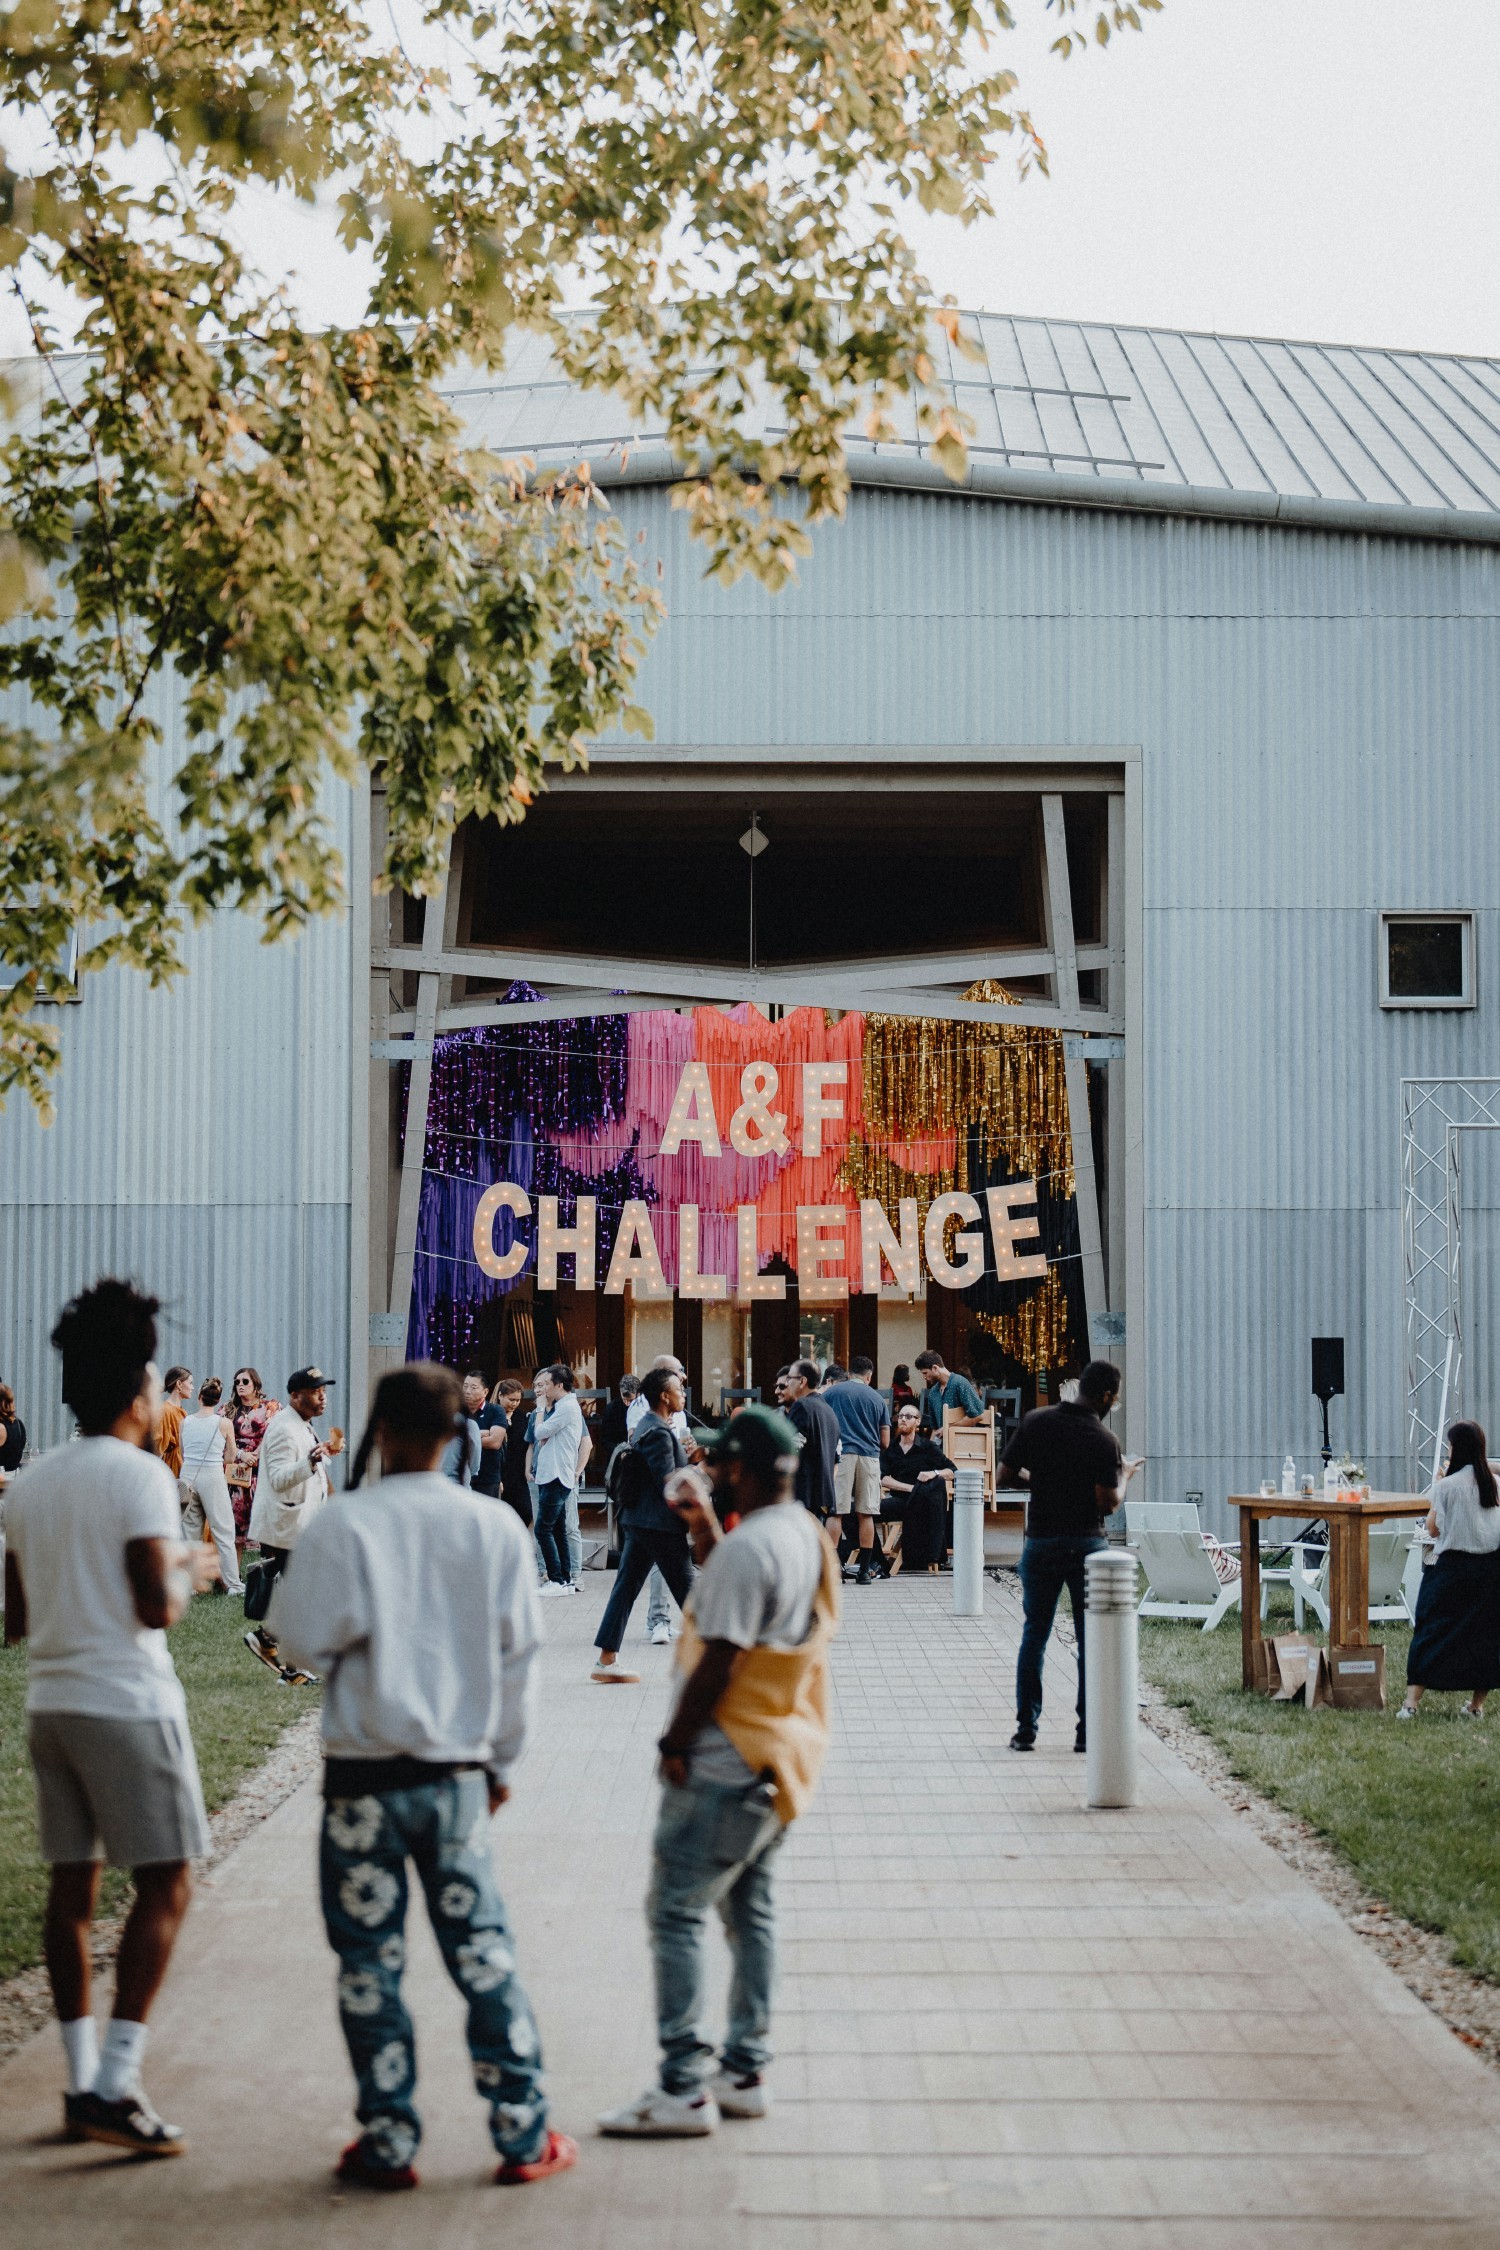 Our annual festival meets fundraiser, The A&F Challenge. Hosted annually raising funds for a family of impact partners. 